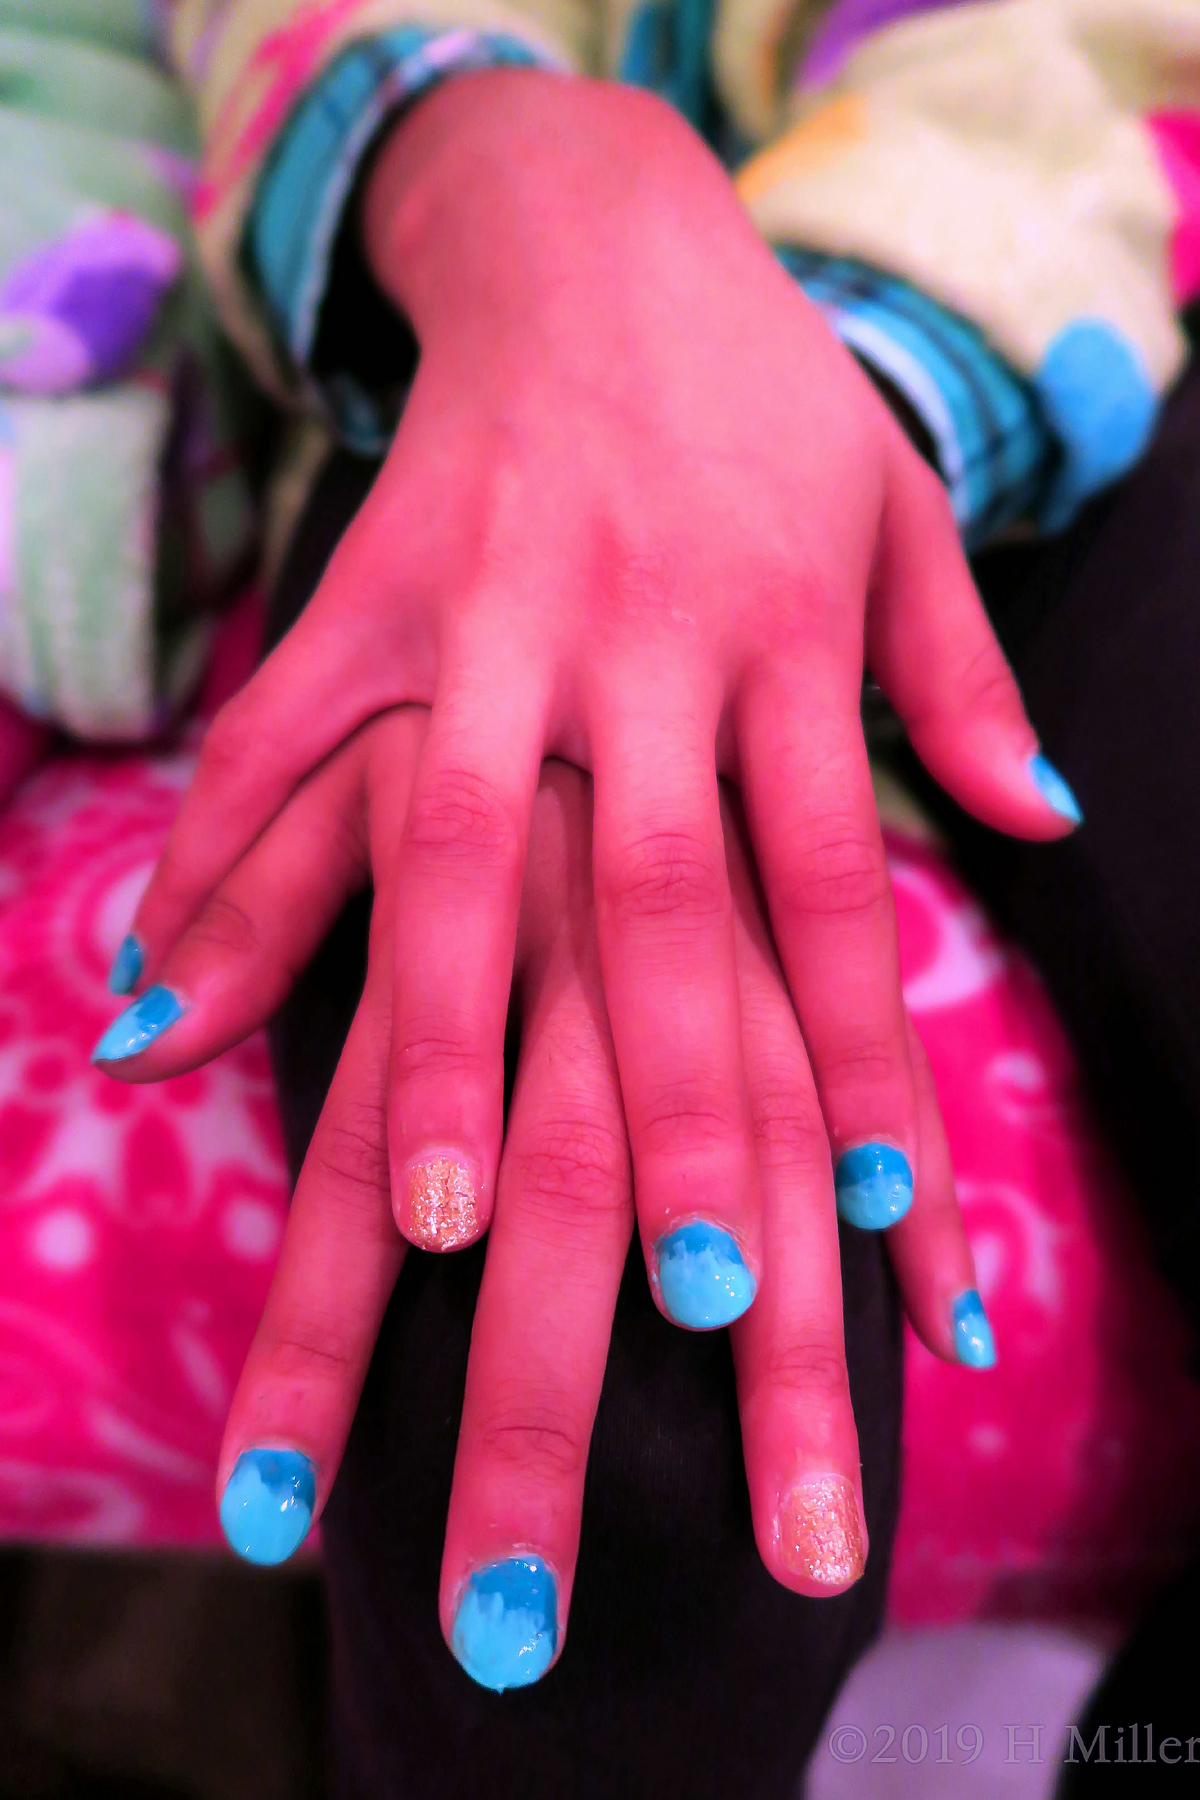 Perfect Ombre Nail Design With Two Shades Of Blue, And A Shimmery Gold Accent Nail On This Kids Manicure! 